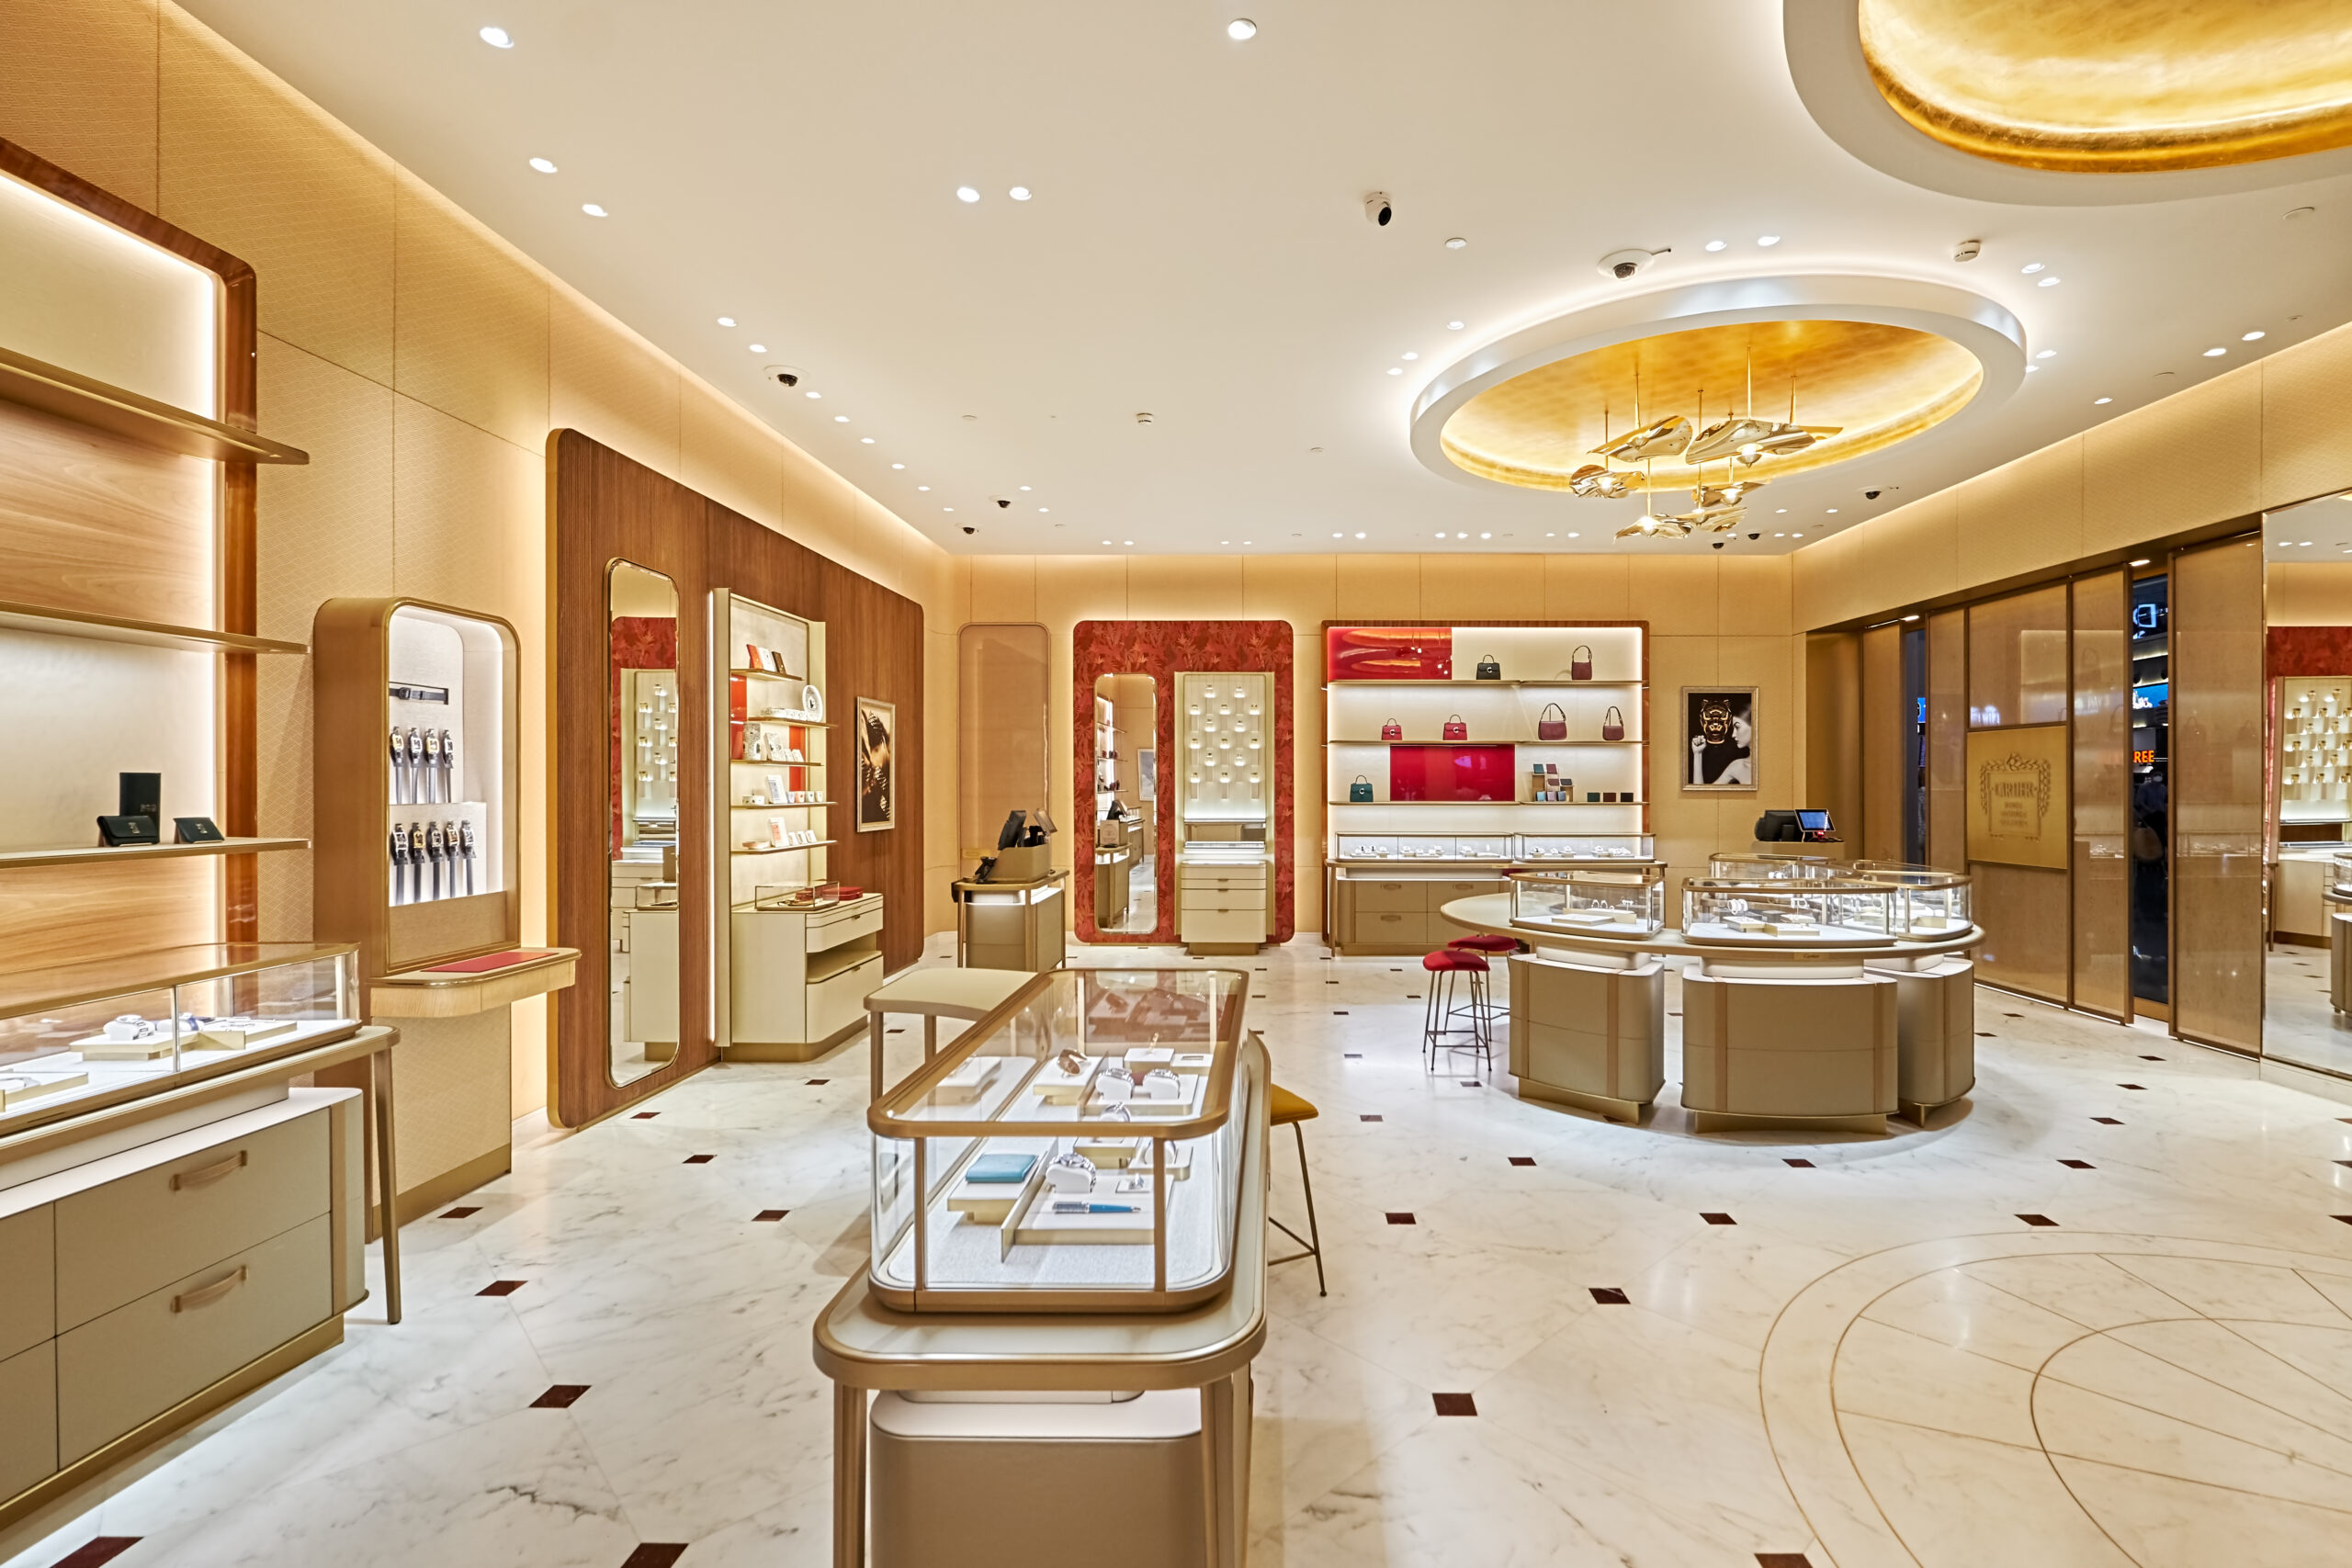 Why Istanbul Airport Makes Sense For Cartier's Biggest Travel